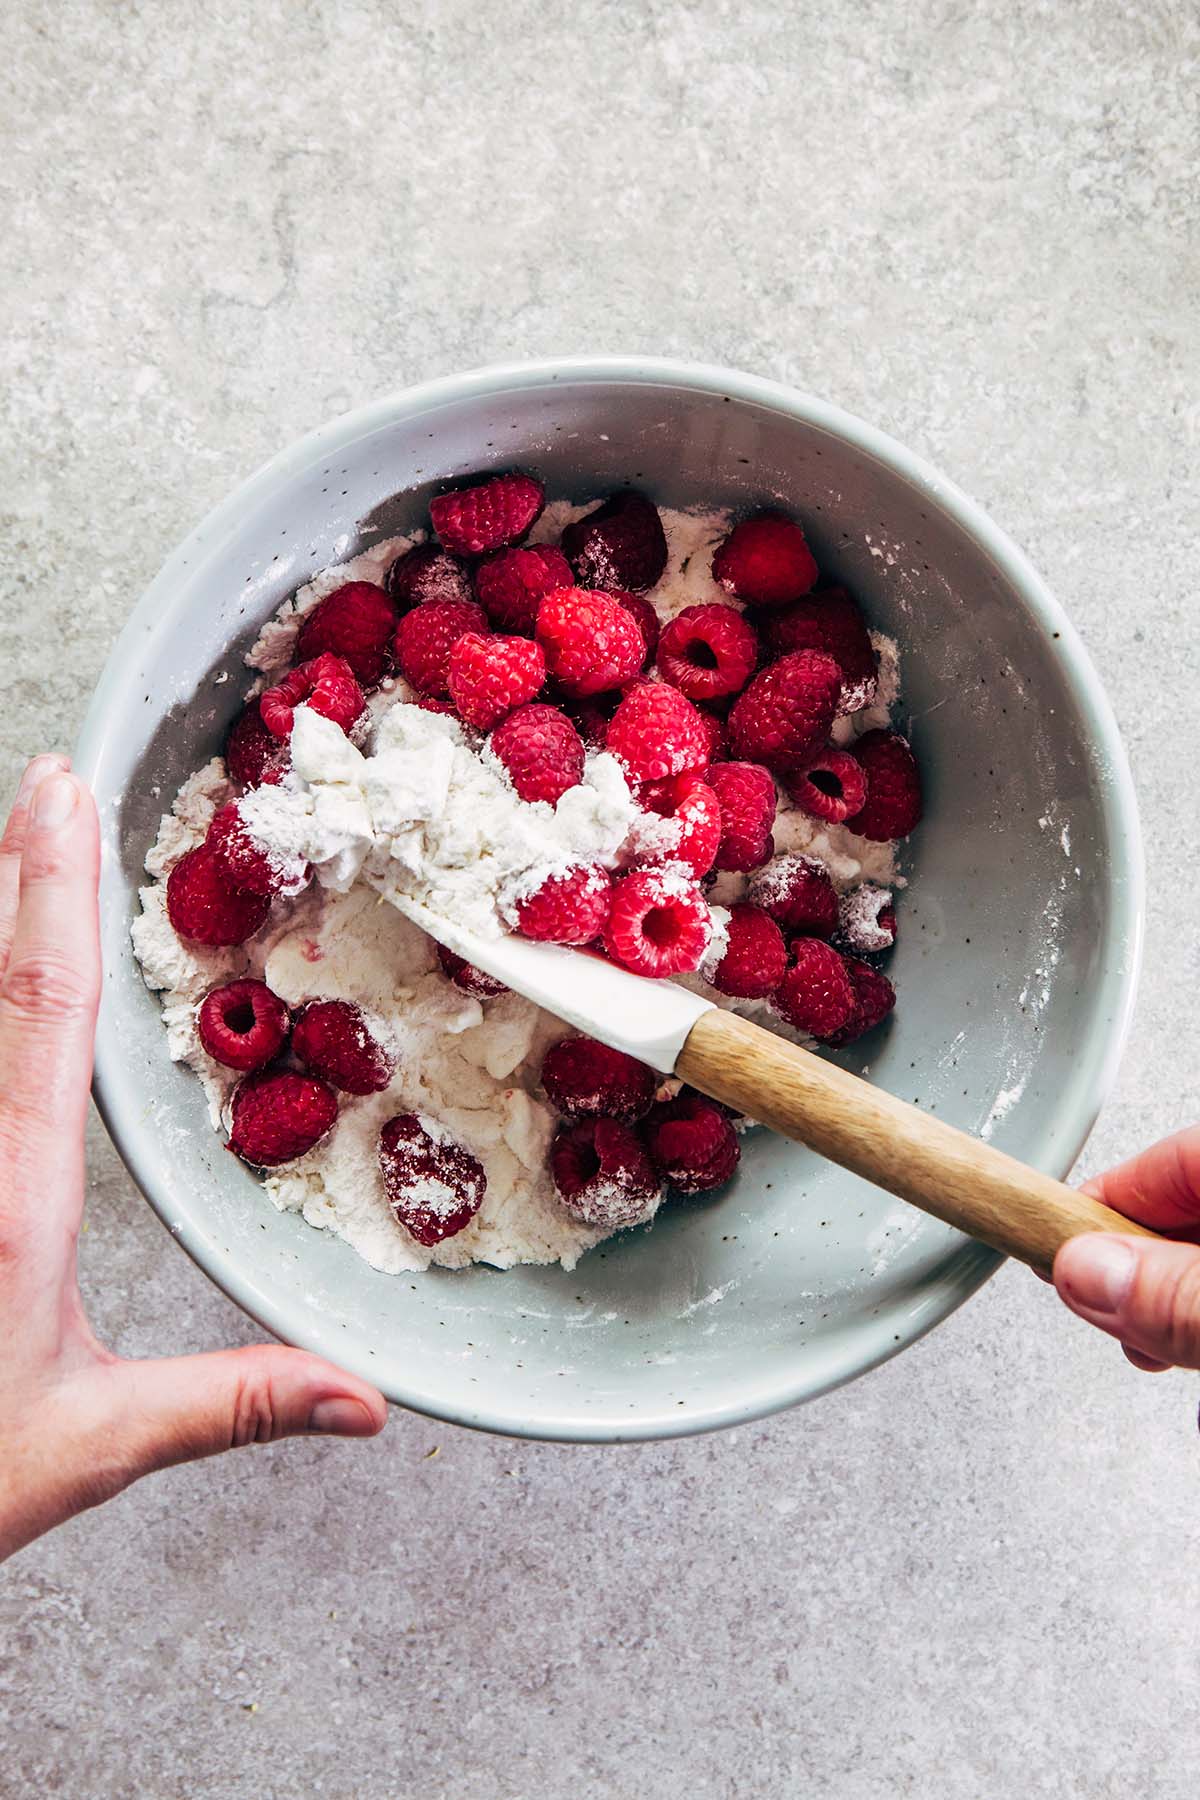 A hand mixing dry muffin ingredients with raspberries using a rubber spatula before the liquid has been added.